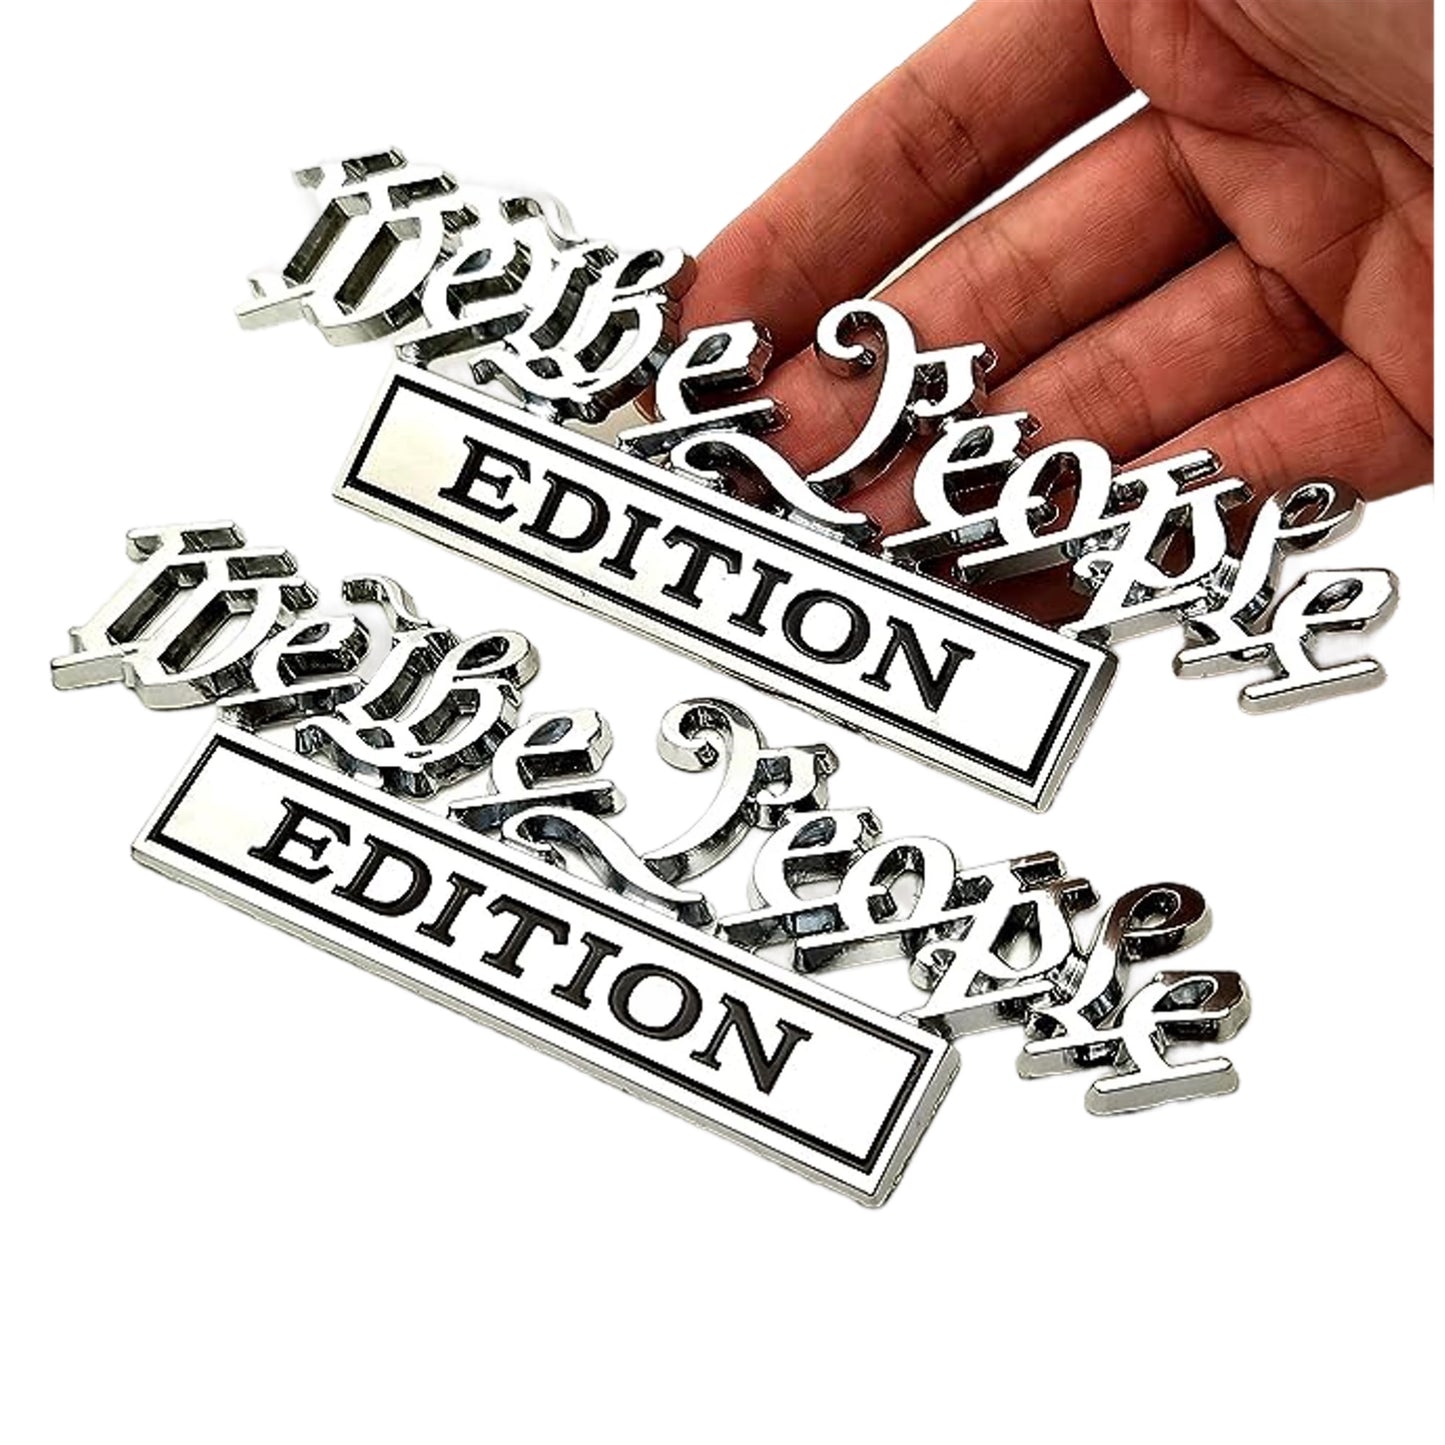 WE THE PEOPLE EDITION - 1x3 Metal Emblem USA MADE